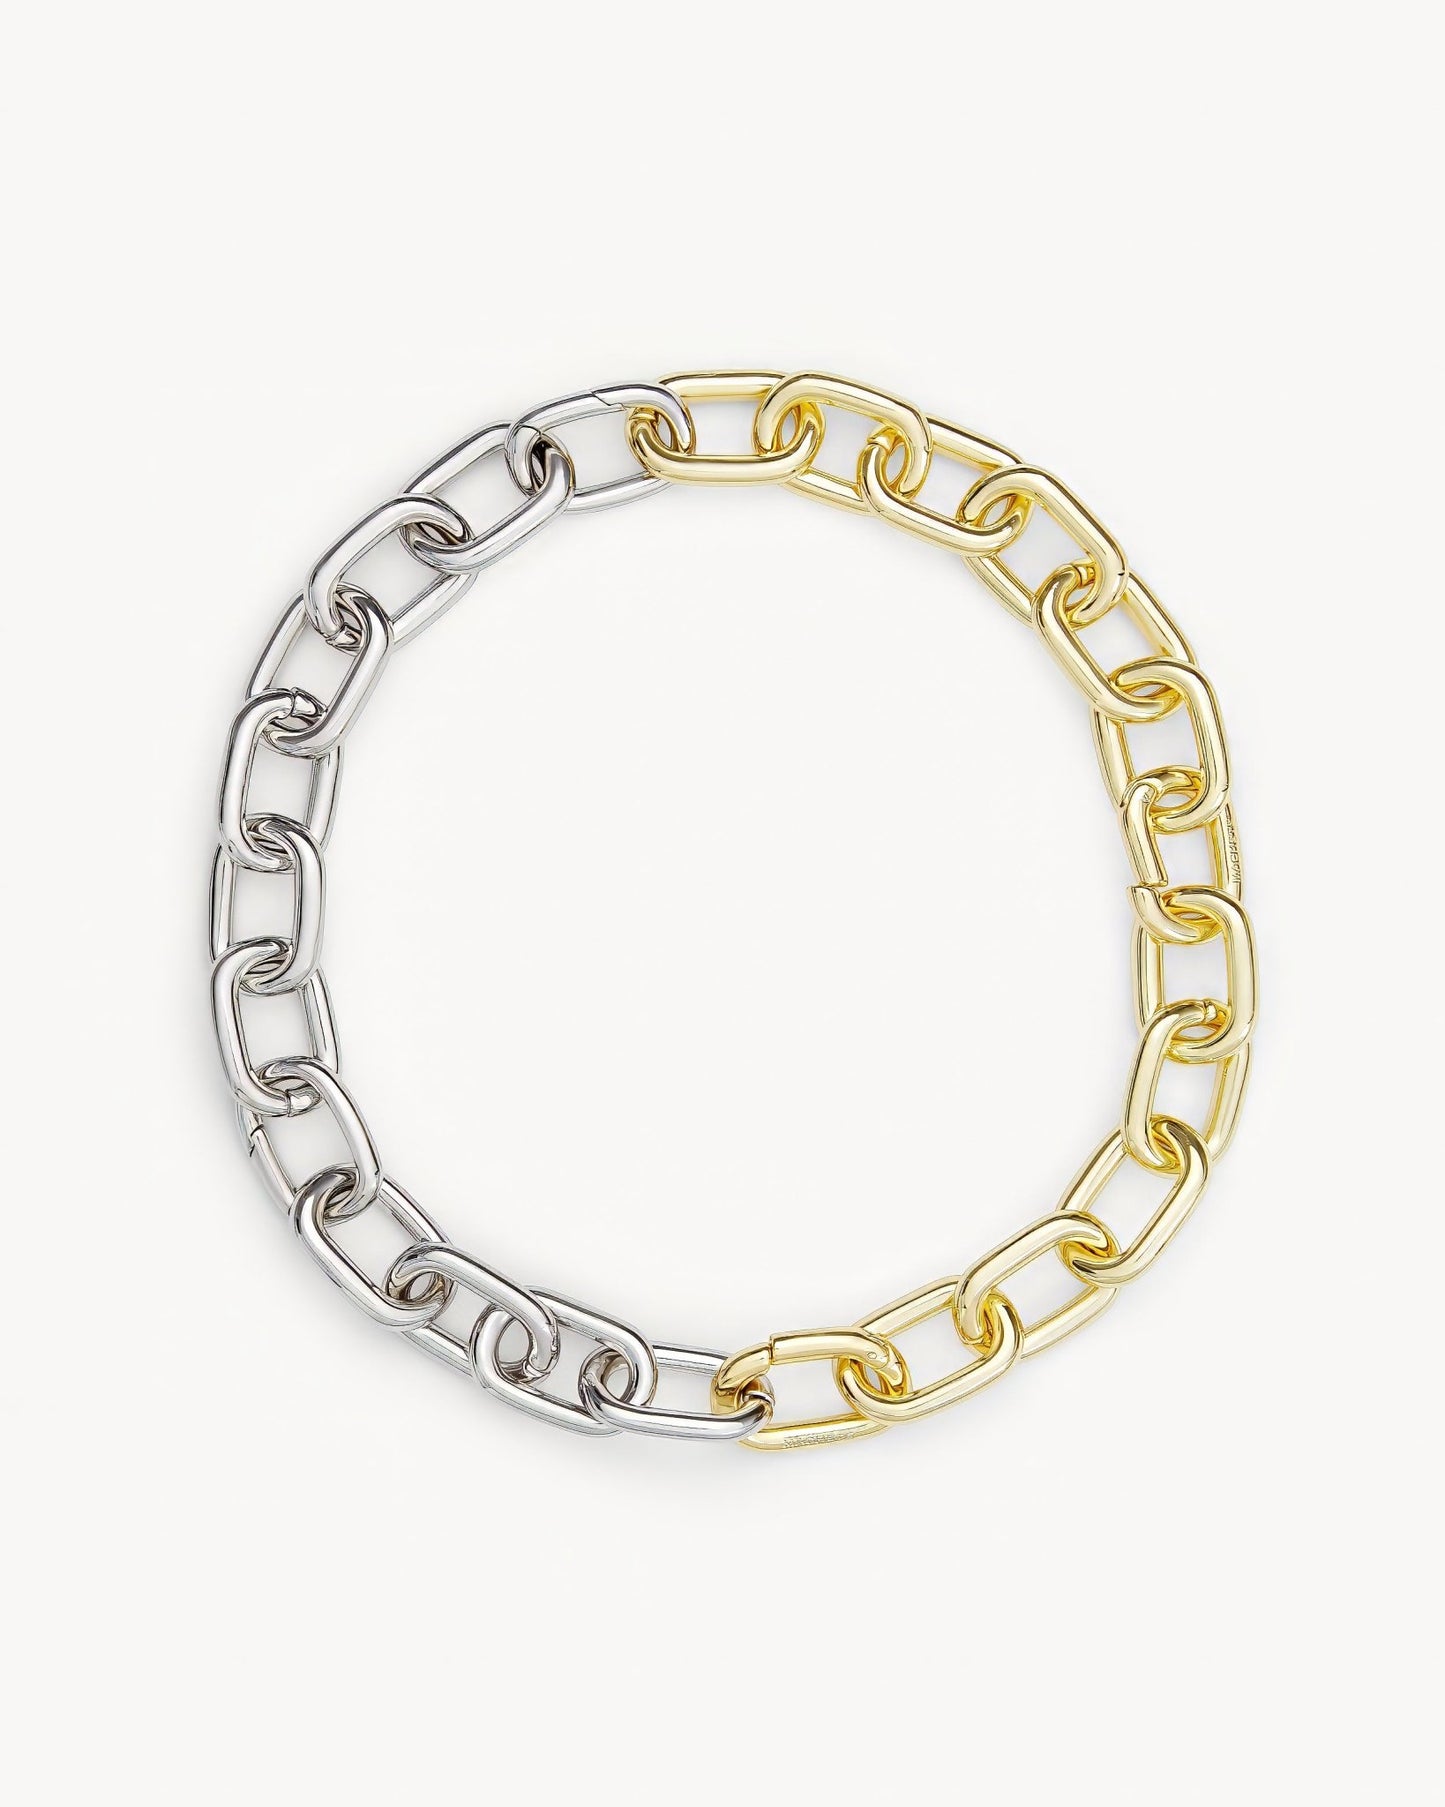 Interchangeable Link Necklace in Gold and Silver Split